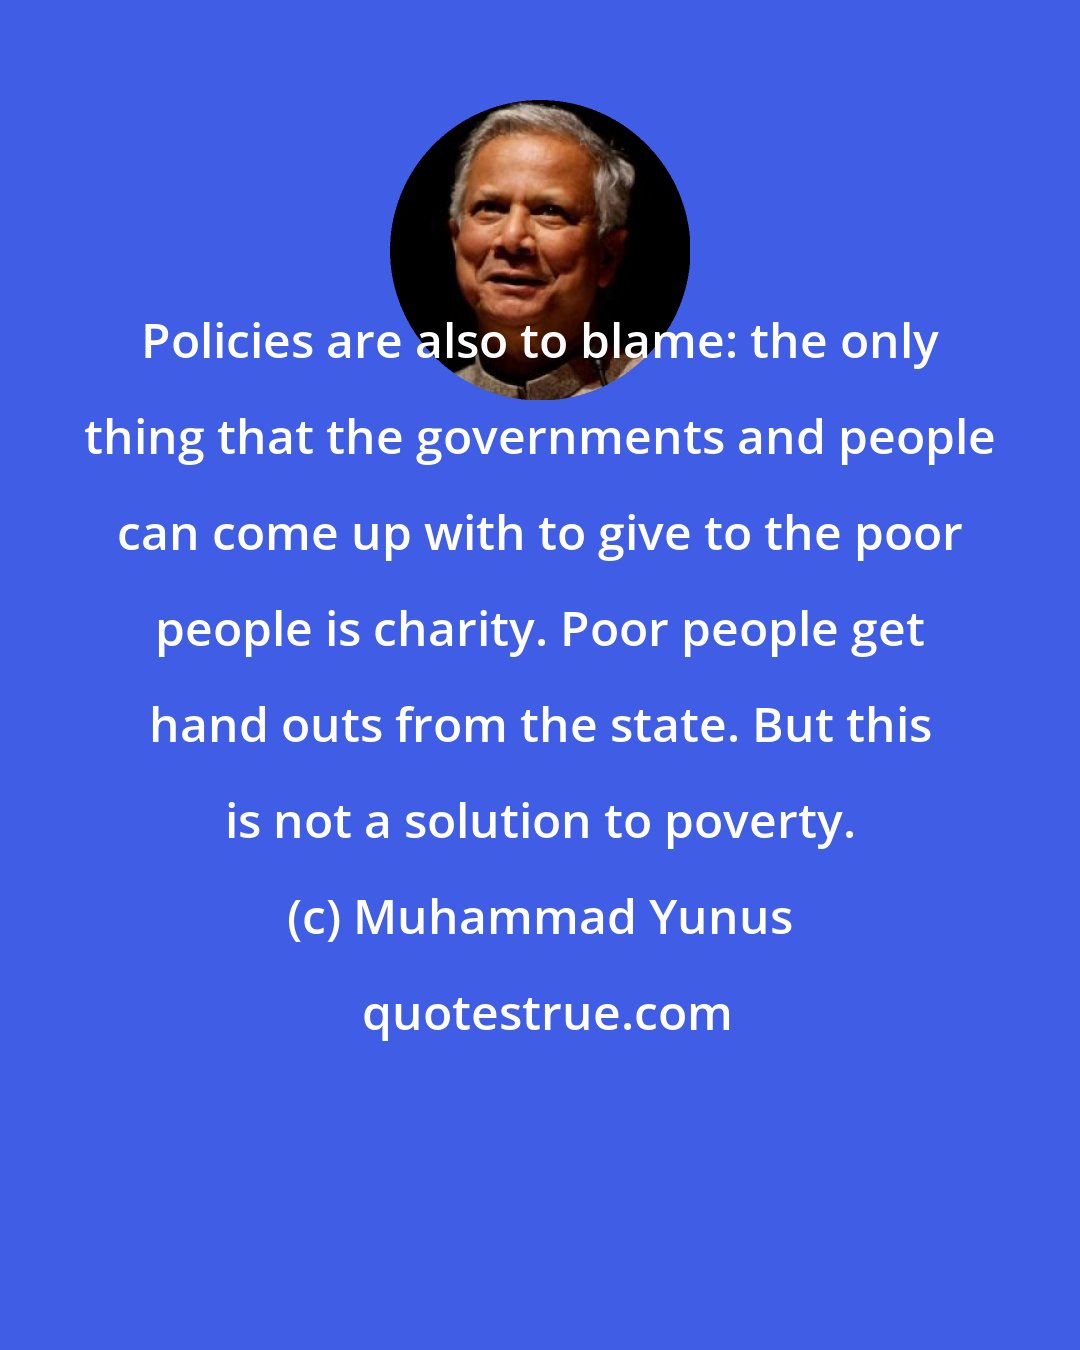 Muhammad Yunus: Policies are also to blame: the only thing that the governments and people can come up with to give to the poor people is charity. Poor people get hand outs from the state. But this is not a solution to poverty.